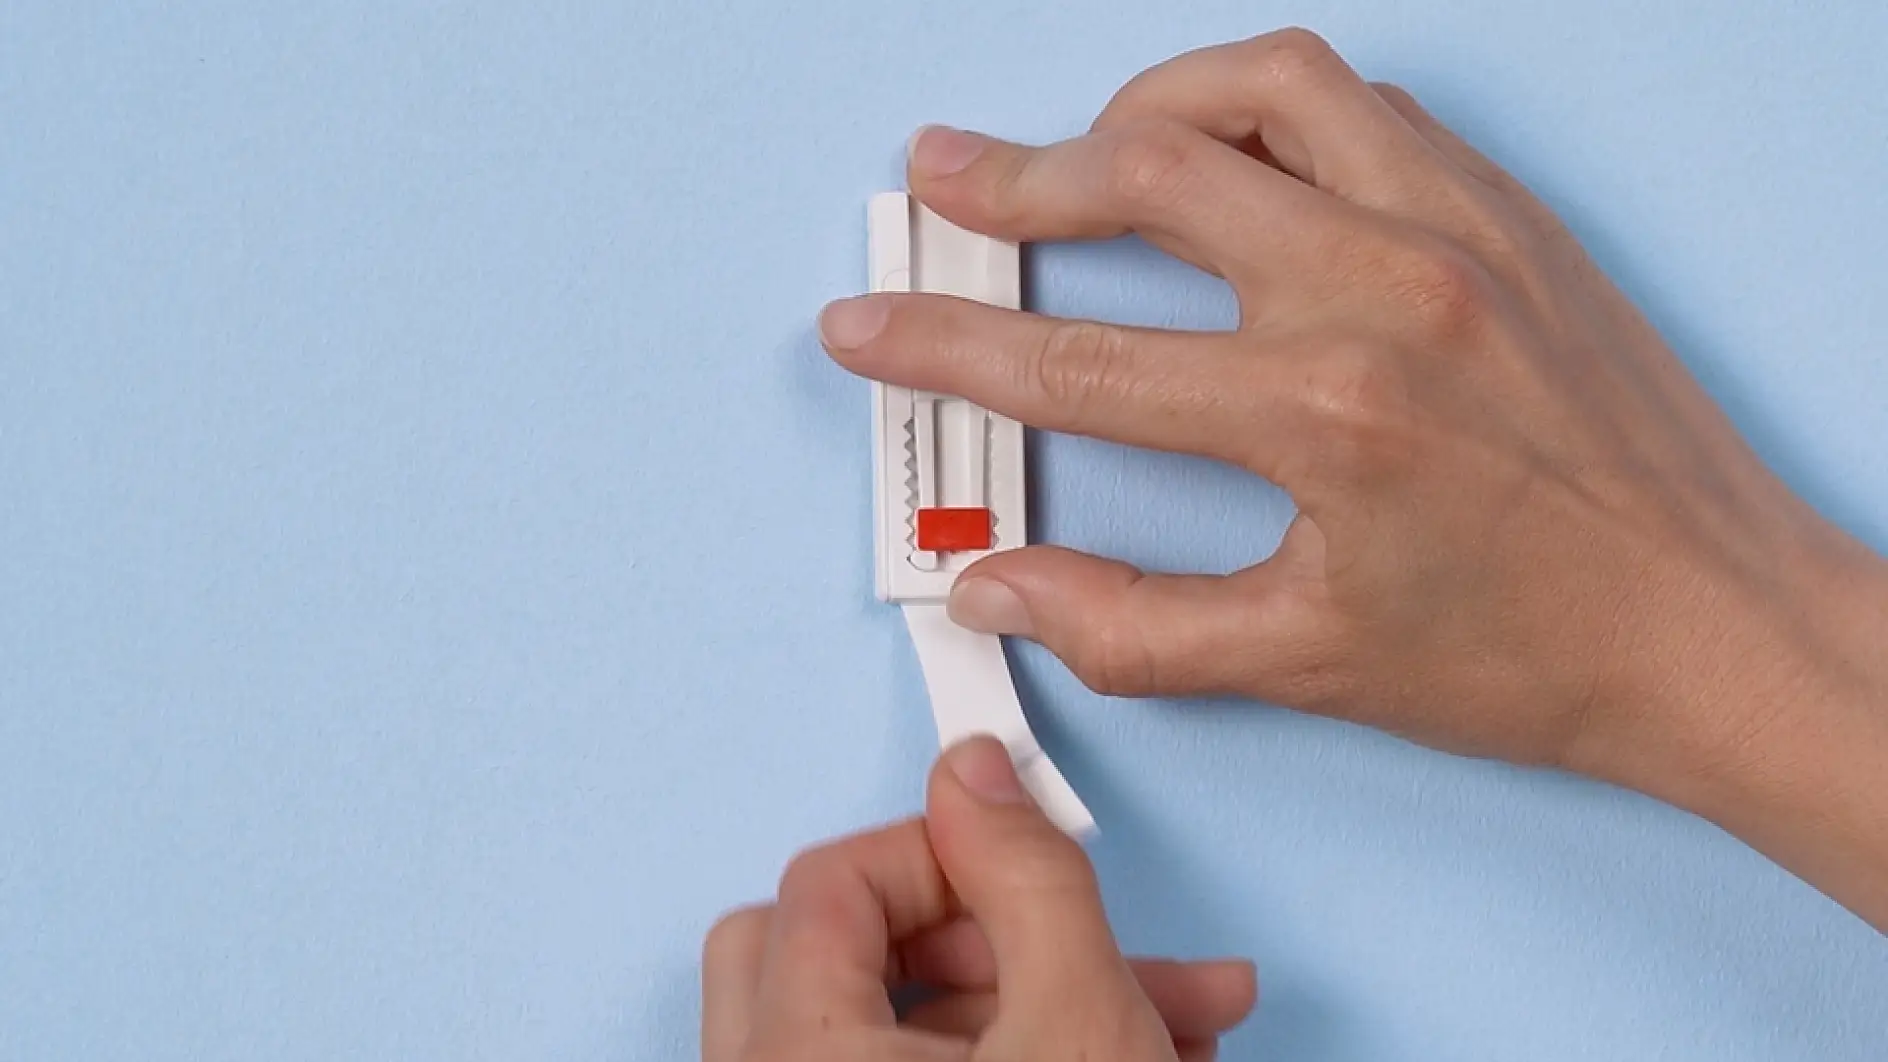 The Adjustable Adhesive Nail by tesa is mounted to the wall, a hand pulls down adhesive strip from under it